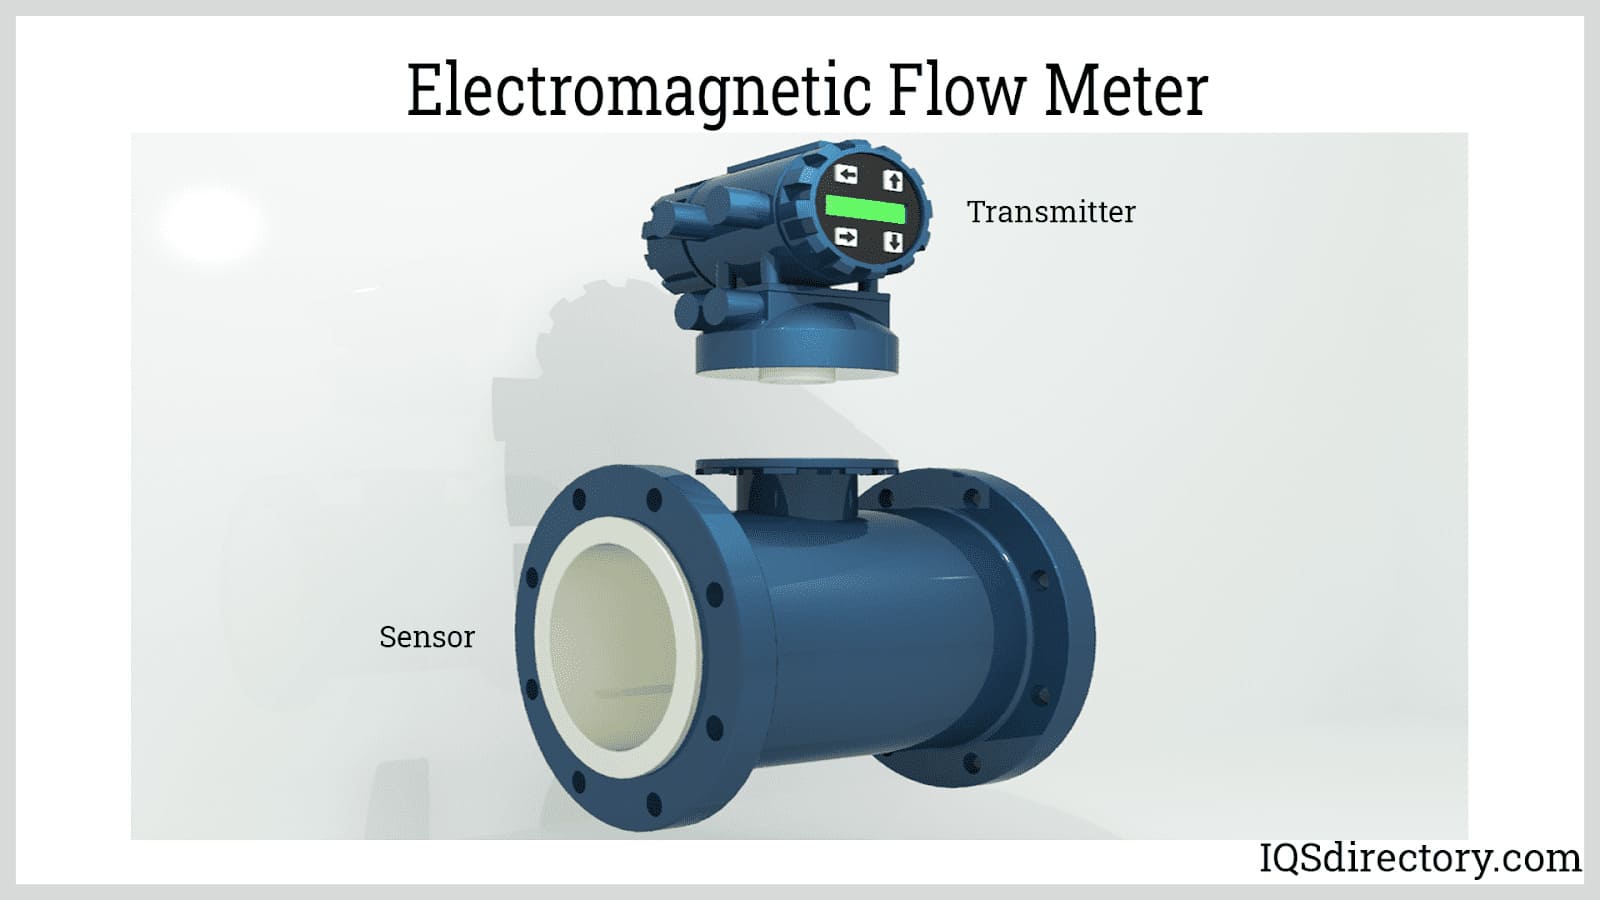 Magnetic Flow Meter: What Is It? How Does It Work? Uses